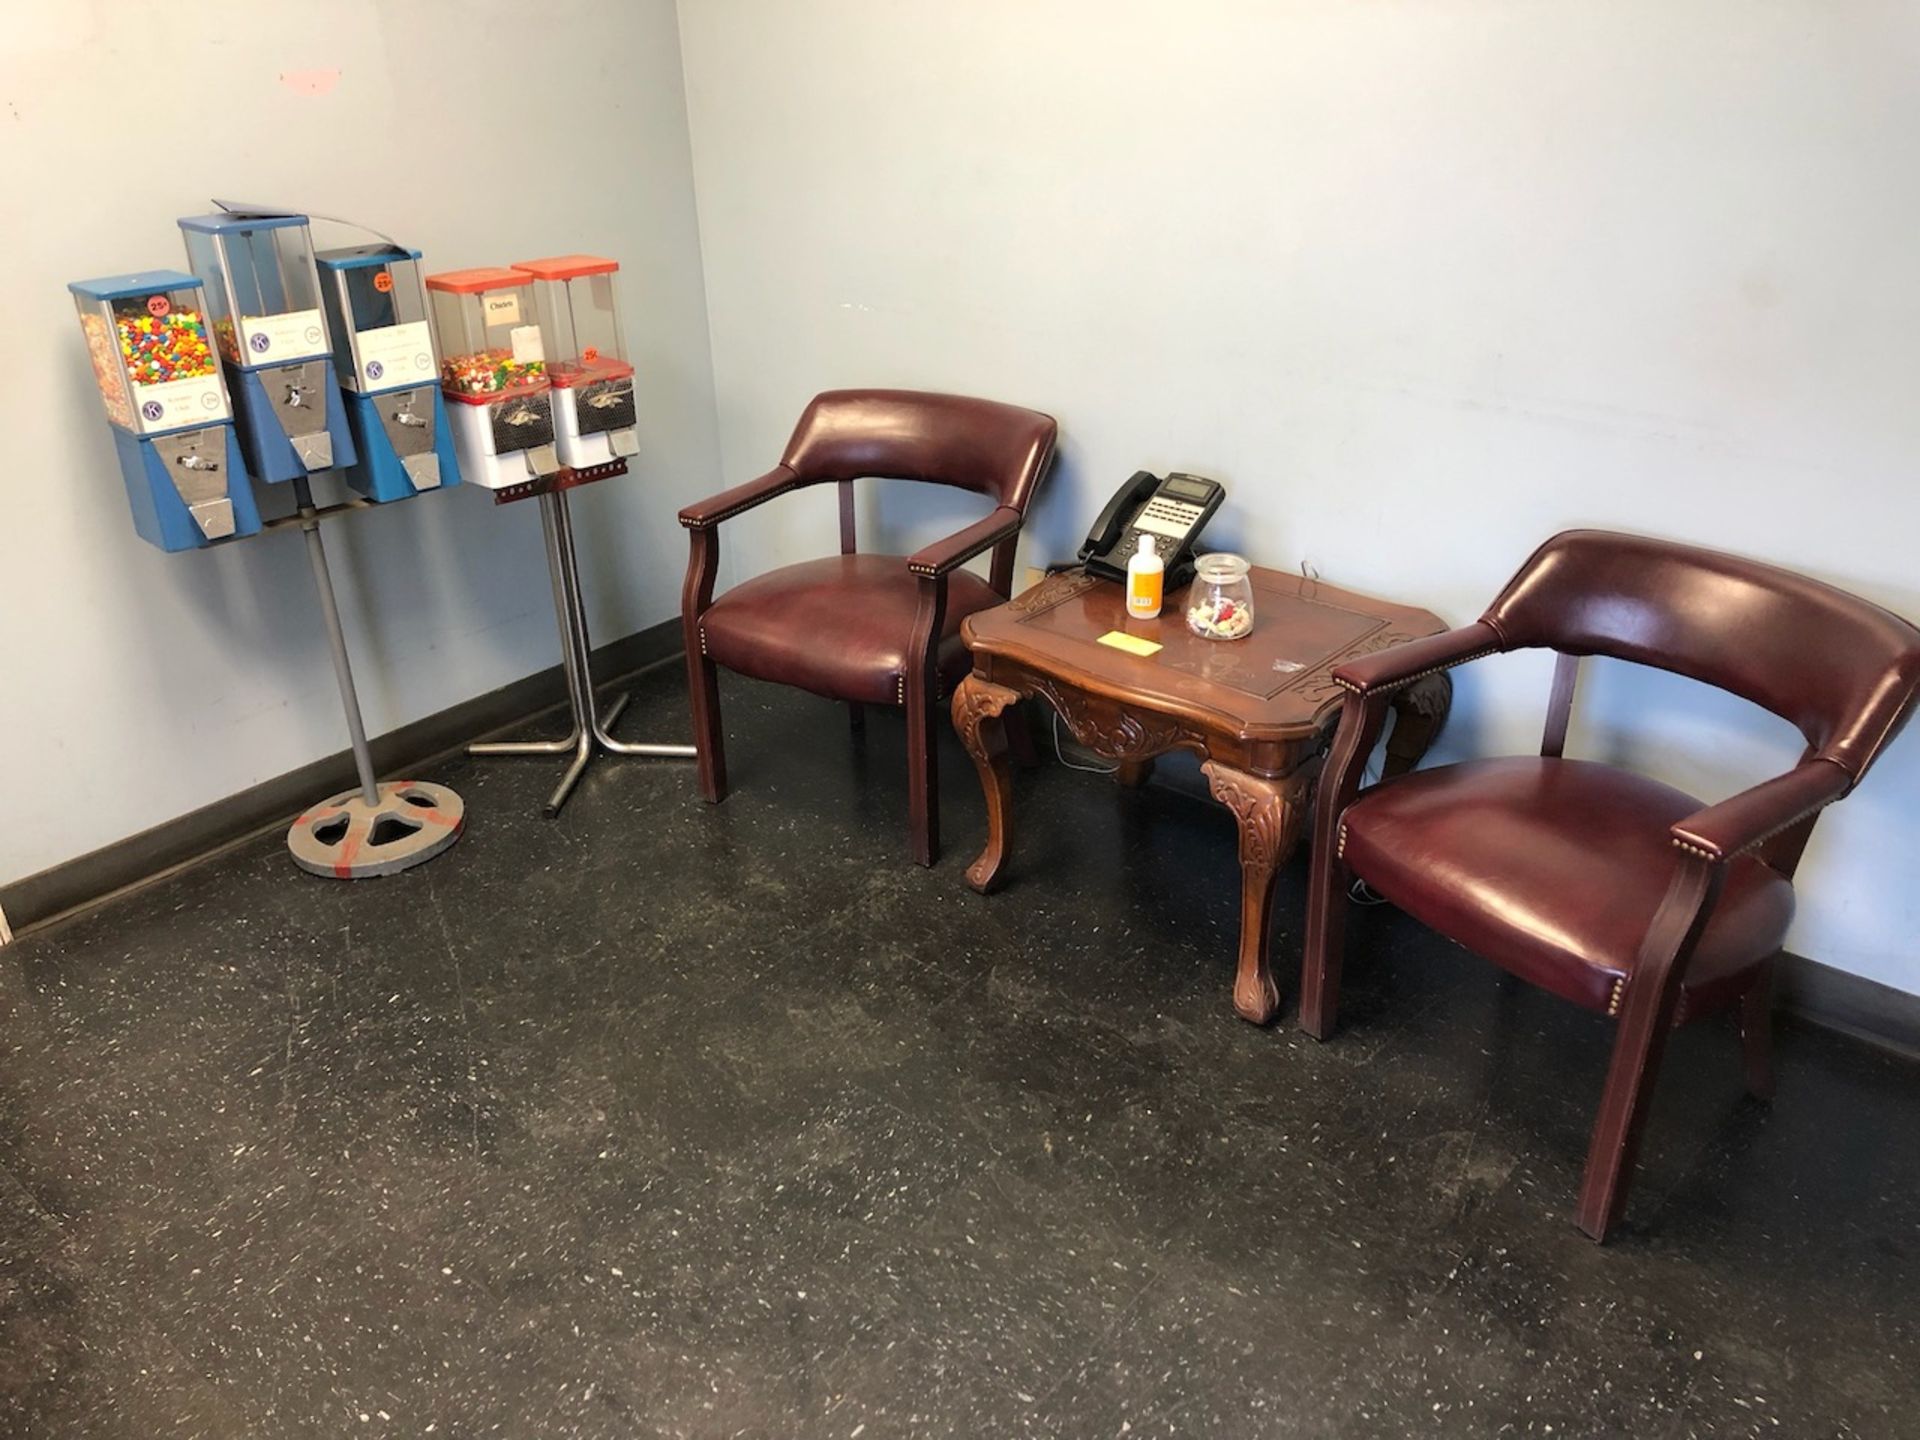 Contents of Entry Room to include 2 Candy Machines/2 Chairs/Table/Phone